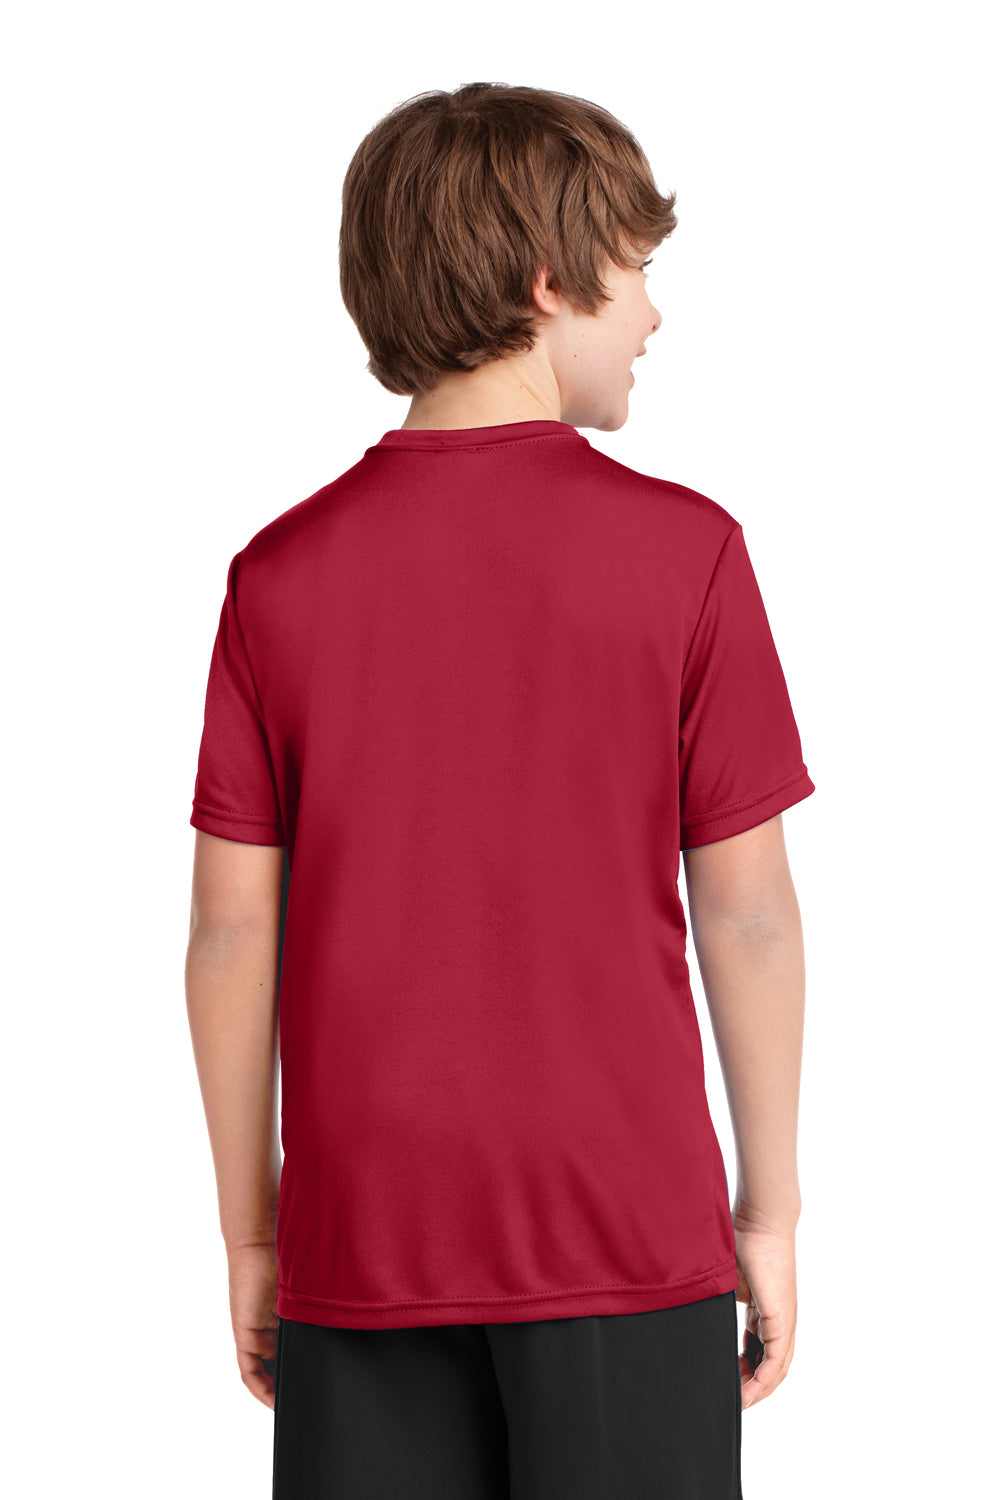 Port & Company PC380Y Youth Dry Zone Performance Moisture Wicking Short Sleeve Crewneck T-Shirt Red Back